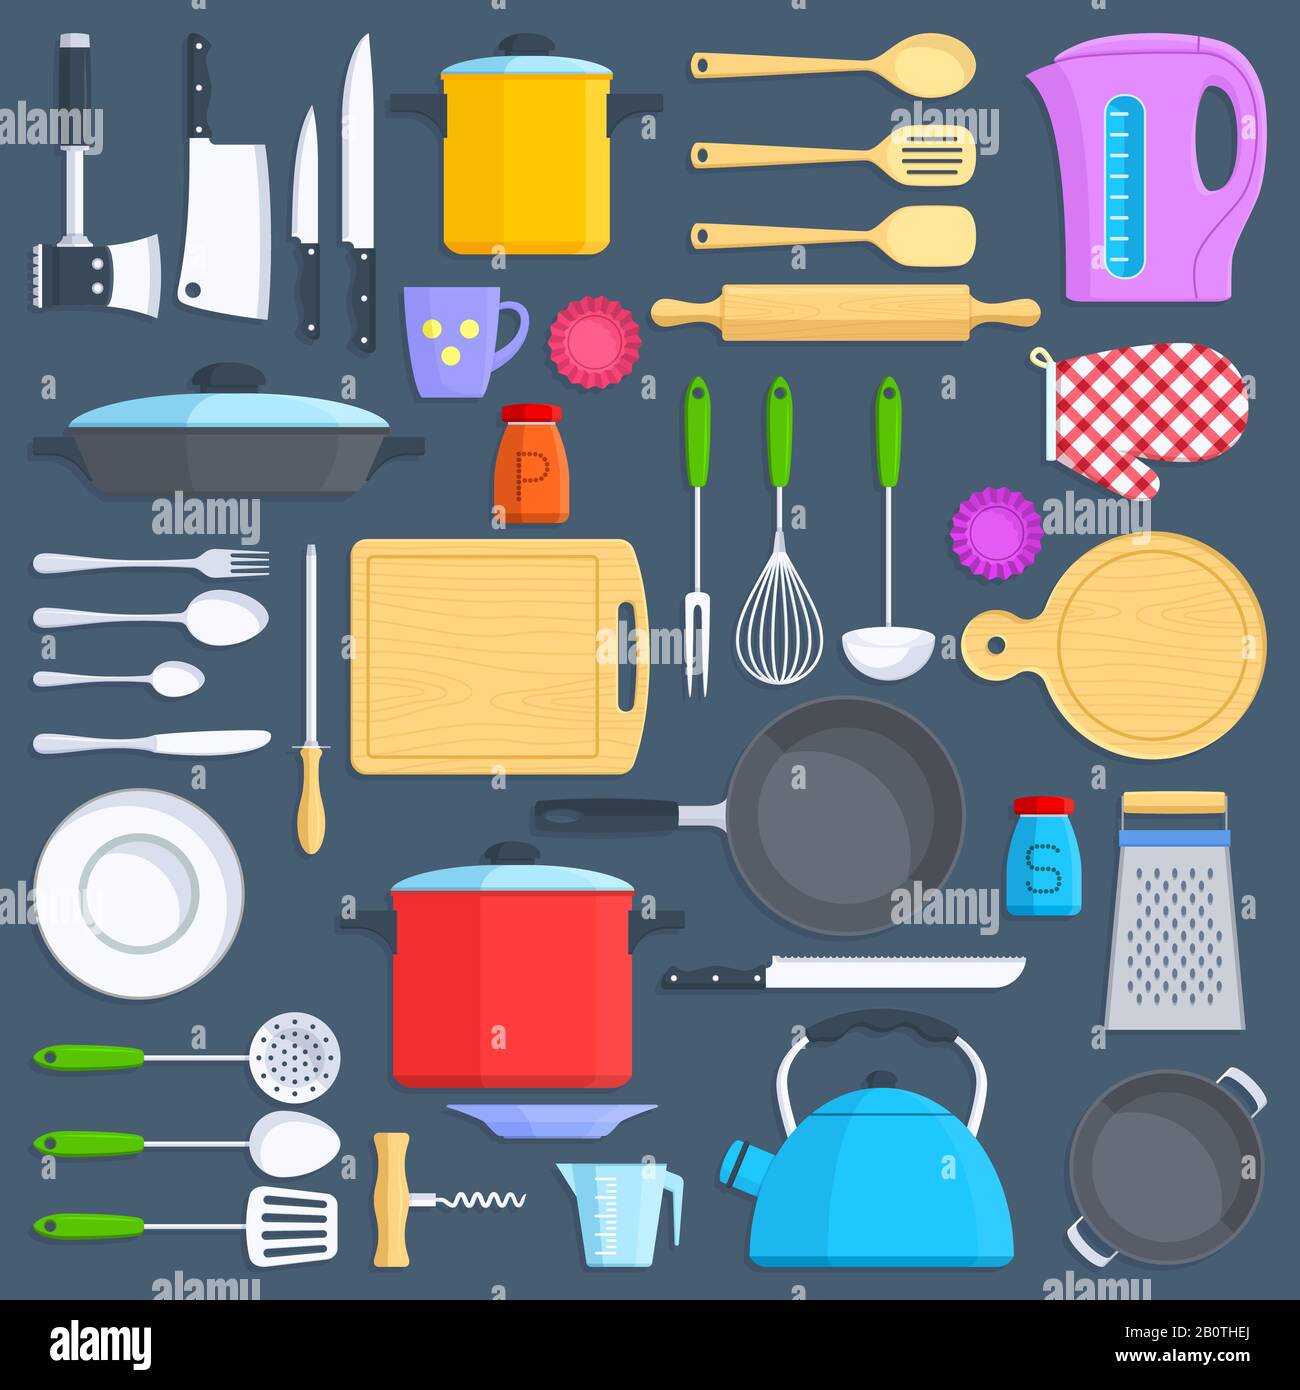 Kitchen tools, cookware and kitchenware flat icons set. Kitchenware cup and pot illustration Stock Vector